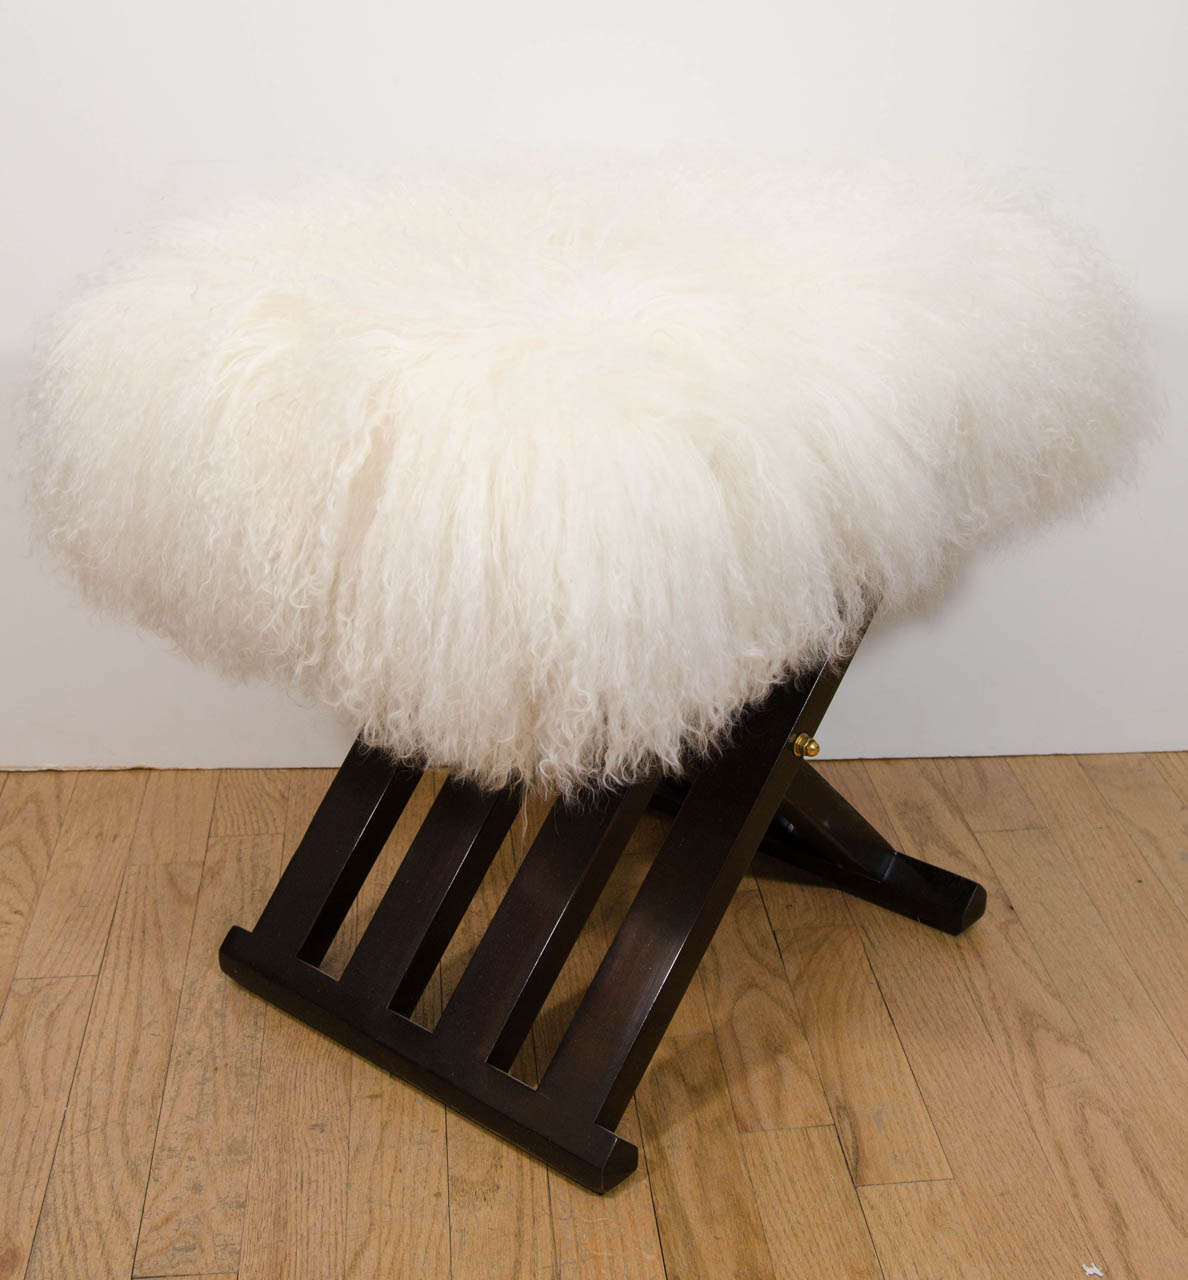 Pair of lacquered wood campaign style benches with upholstered shearling cushions and brass details by Harvey Probber.